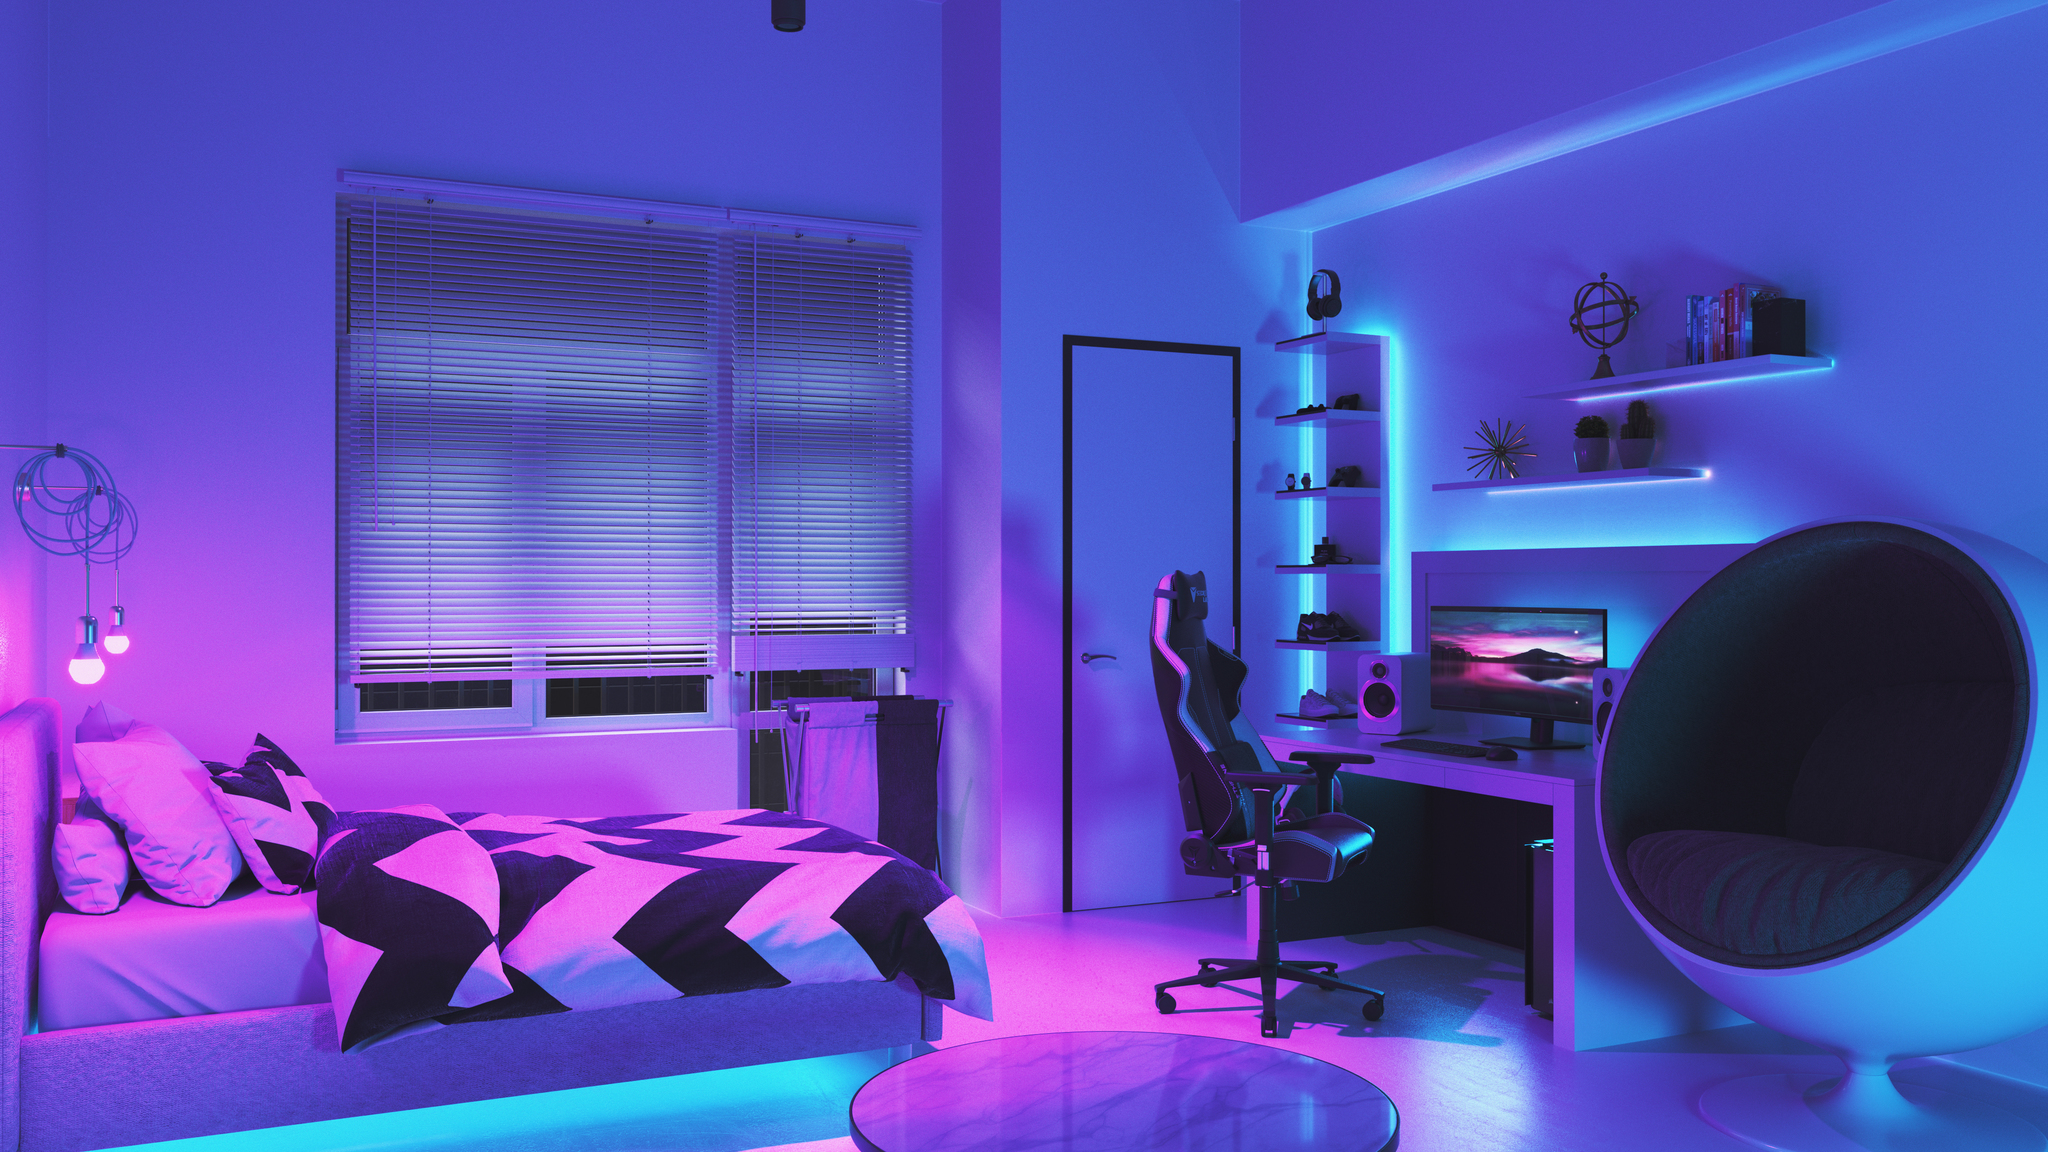 Best Hot Light Strips 2022 Imore - Good Colors To Paint Your Room With Led Lights